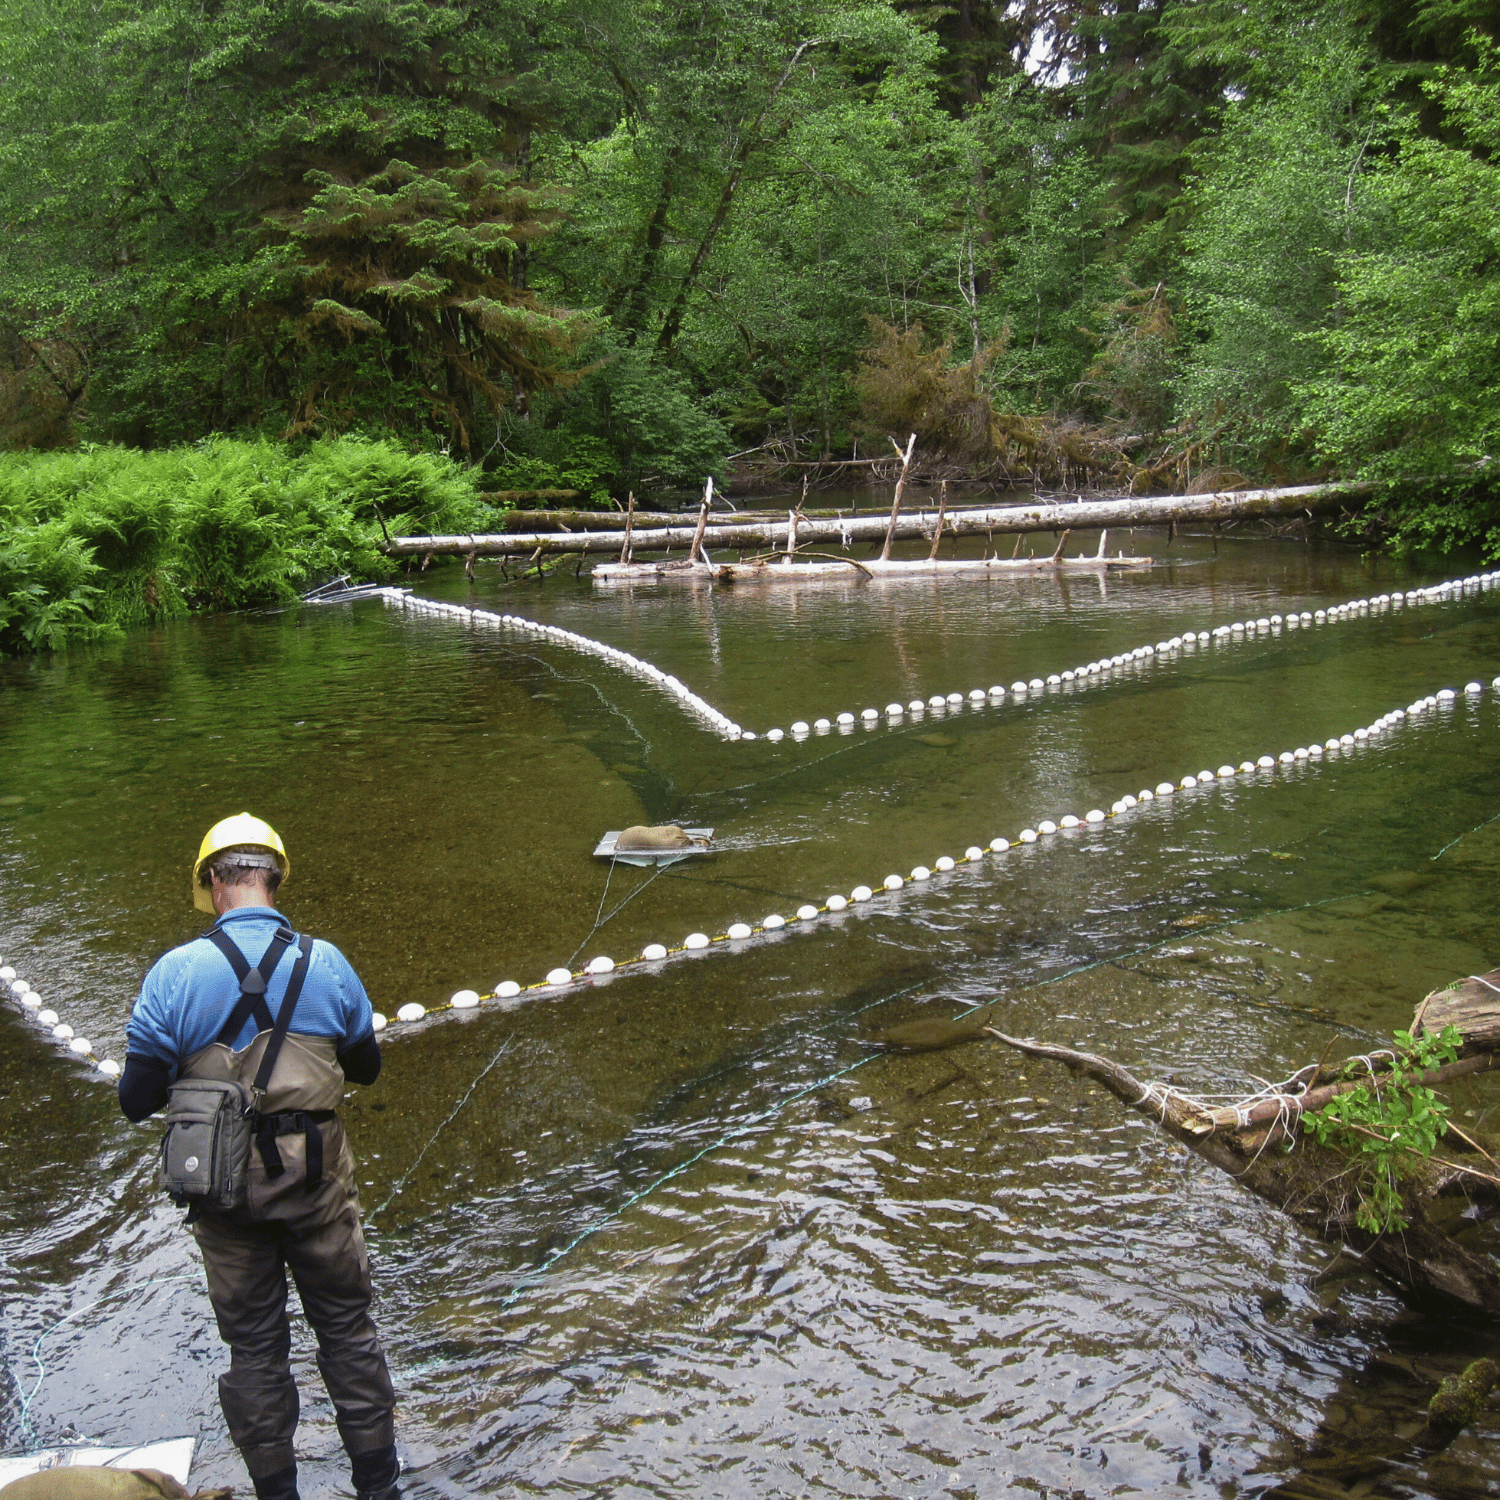 state wildlife management conducting fish research with seine netting